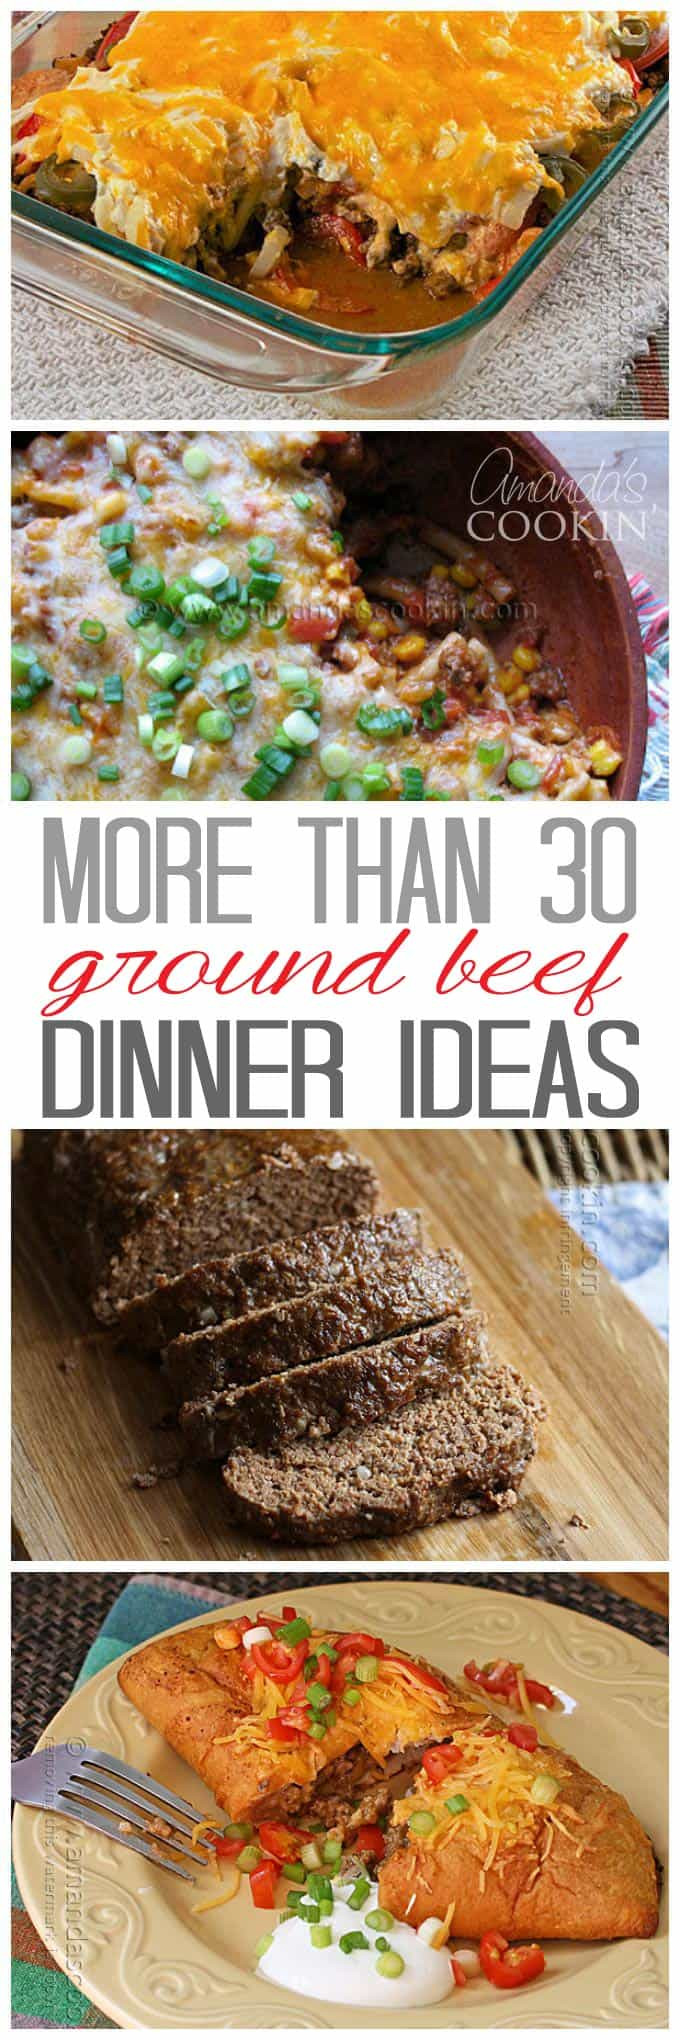 Ground Beef Ideas
 Ground Beef Dinner Ideas 30 recipes for supper